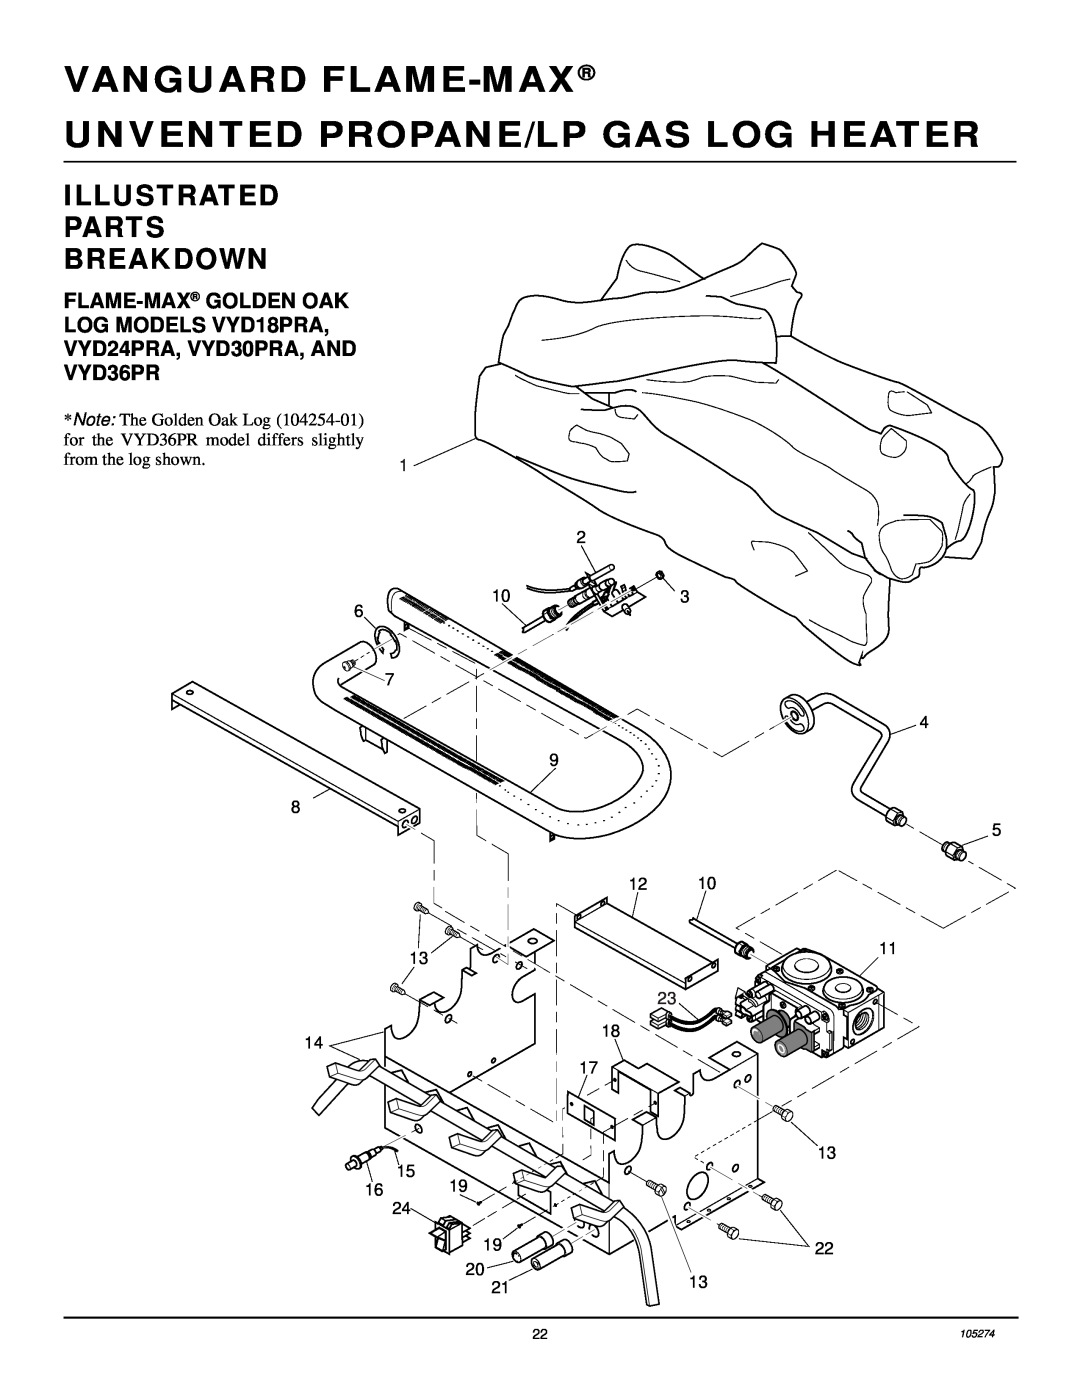 Vanguard Heating UNVENTED (VENT-FREE) PROPANE/LP GAS LOG HEATER Illustrated Parts Breakdown, Vanguard Flame-Max, 105274 